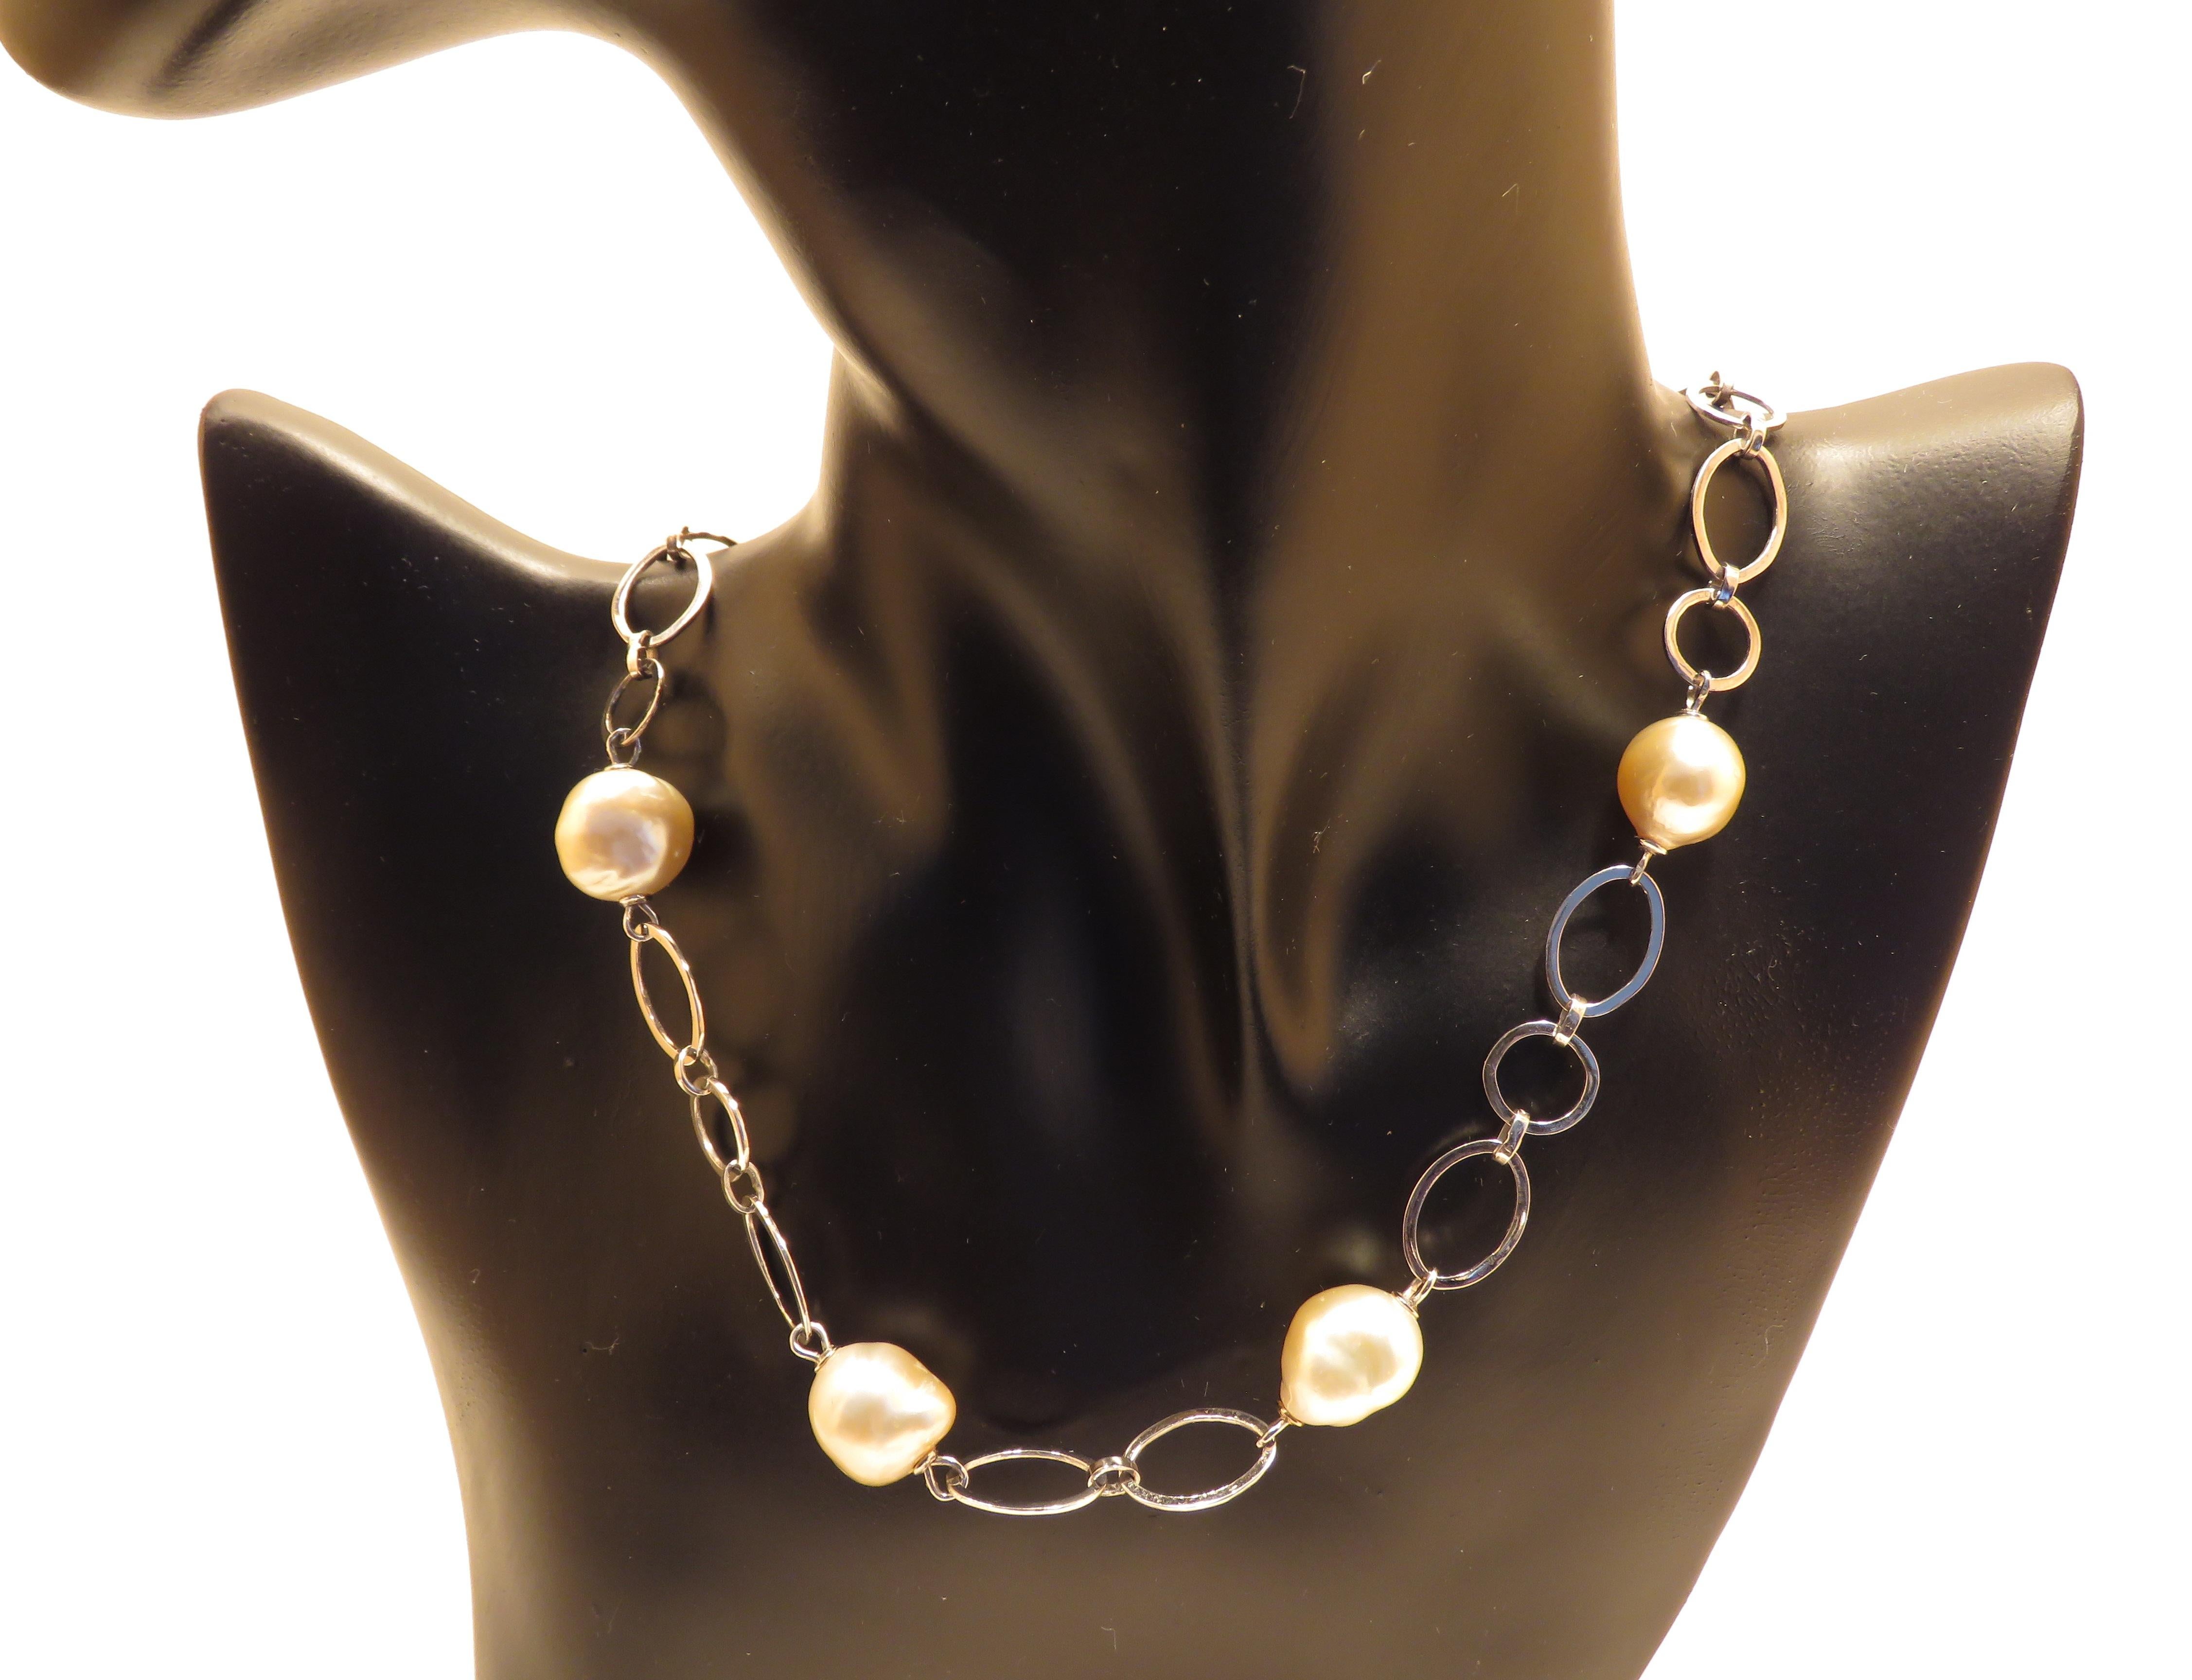 Unbelievable 4 natural Australian pearls (12 x 14 millimeters / 0.47 x 0.55 inches) necklace in 18k white gold. Total length is 450 millimeters / 17.71 inches.
Handcrafted in Italy by Botta Gioielli. This item is stamped with the Italian Gold Mark